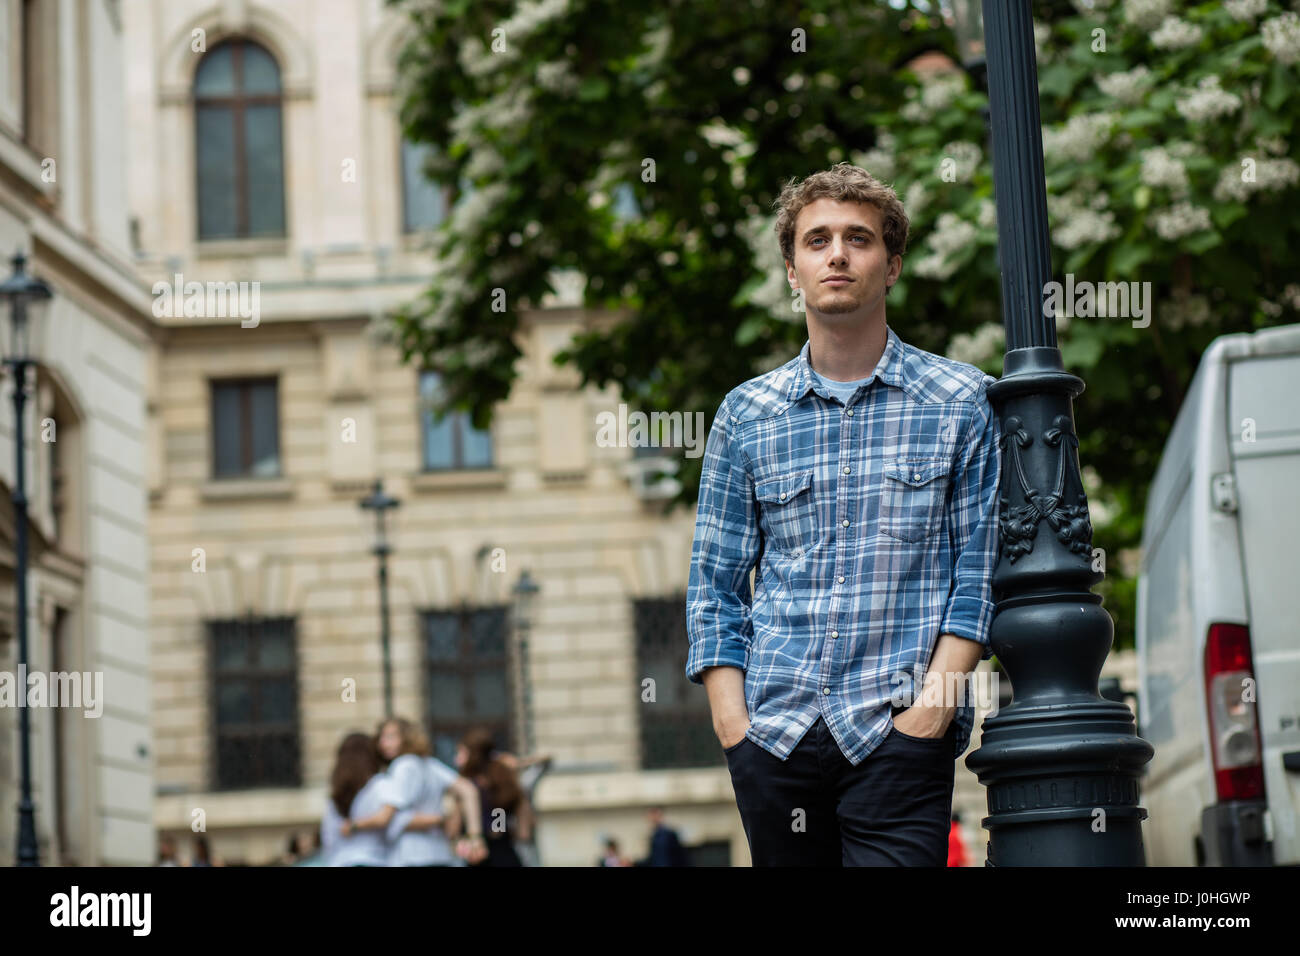 young blond and curly man with checkered shirt standing outside near a lamppost street Stock Photo